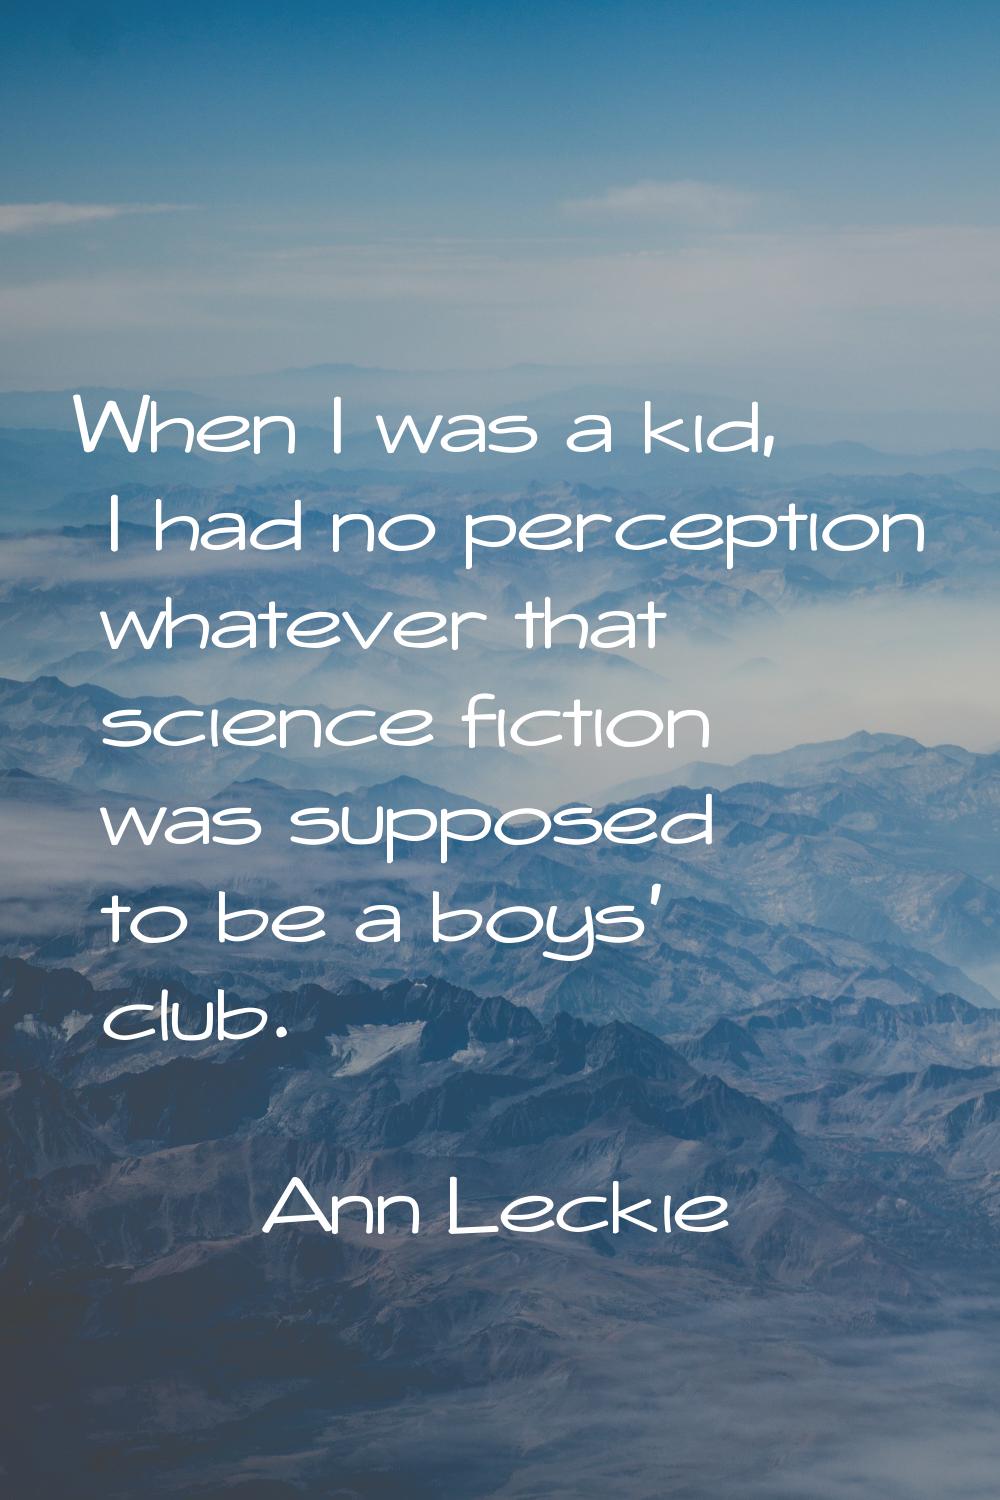 When I was a kid, I had no perception whatever that science fiction was supposed to be a boys' club